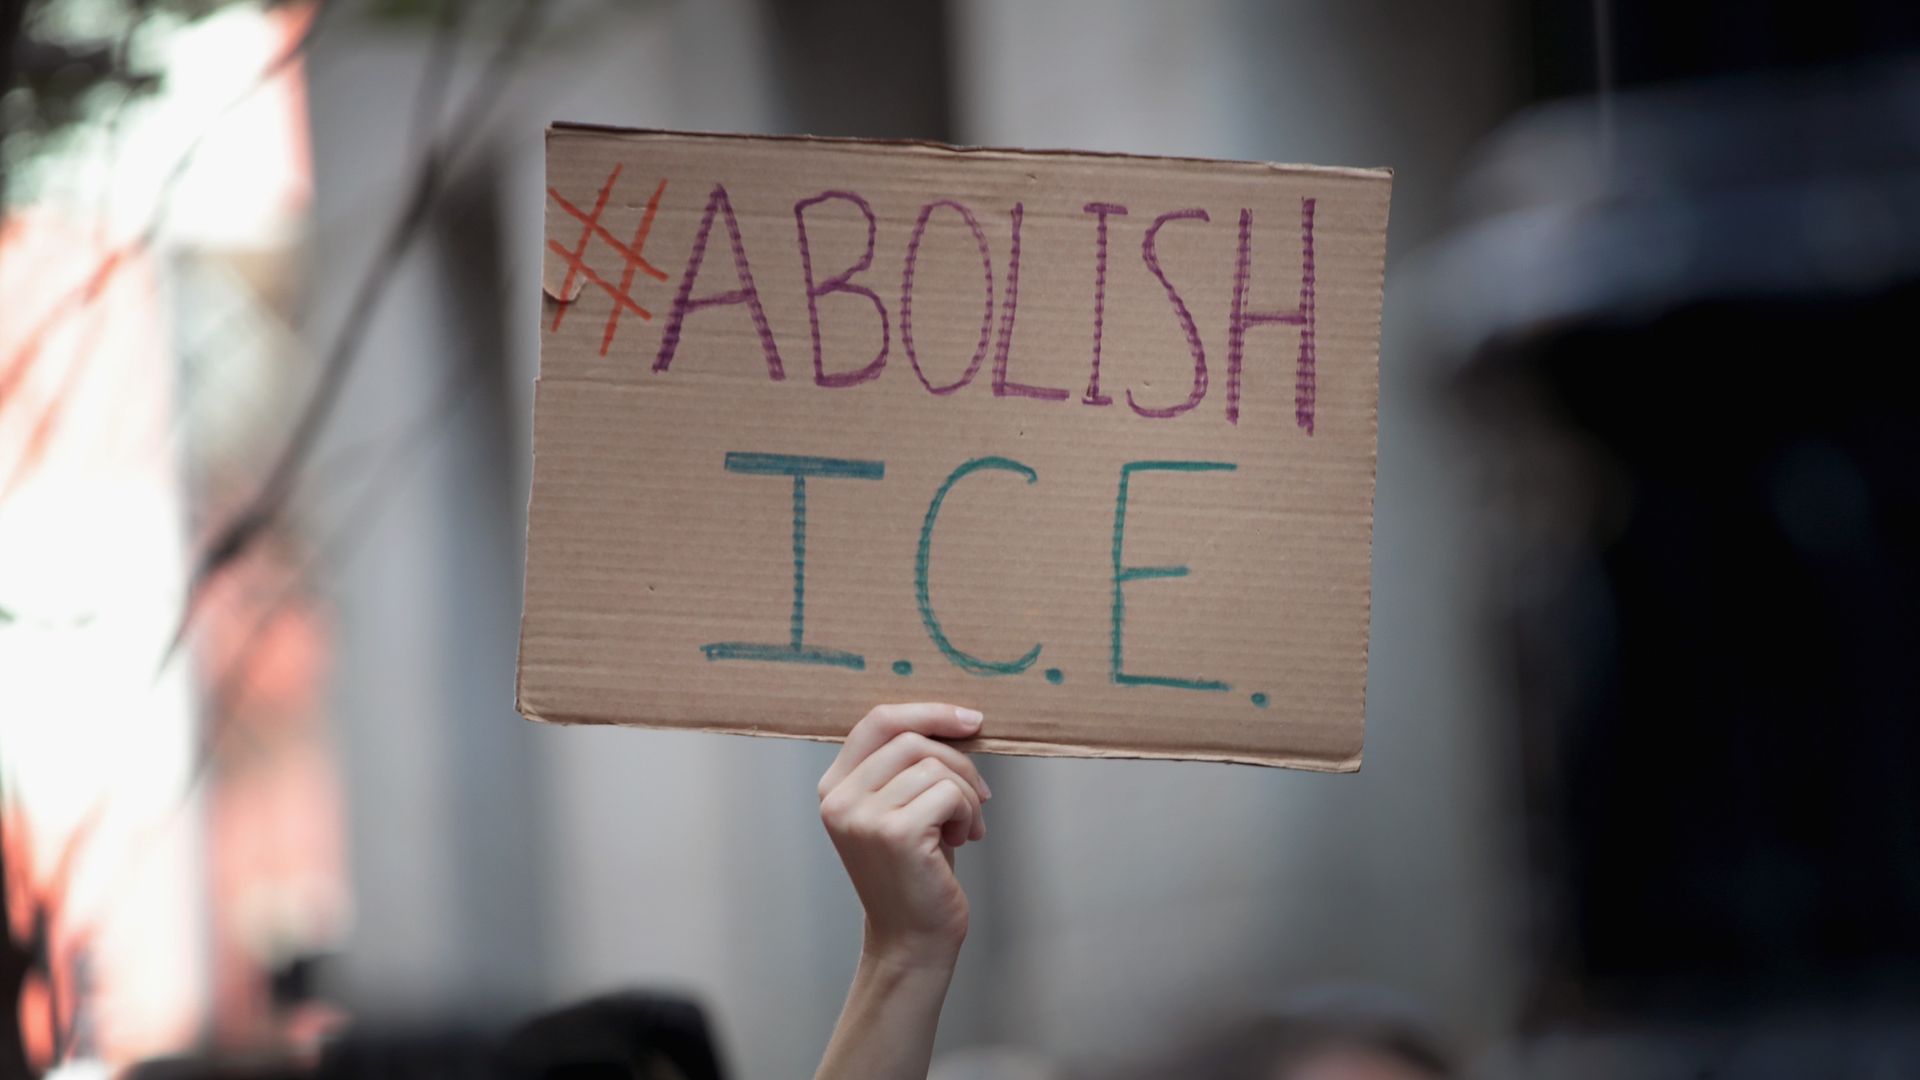 A hand holding up a cardboard sign that has "Abolish ICE" written on it